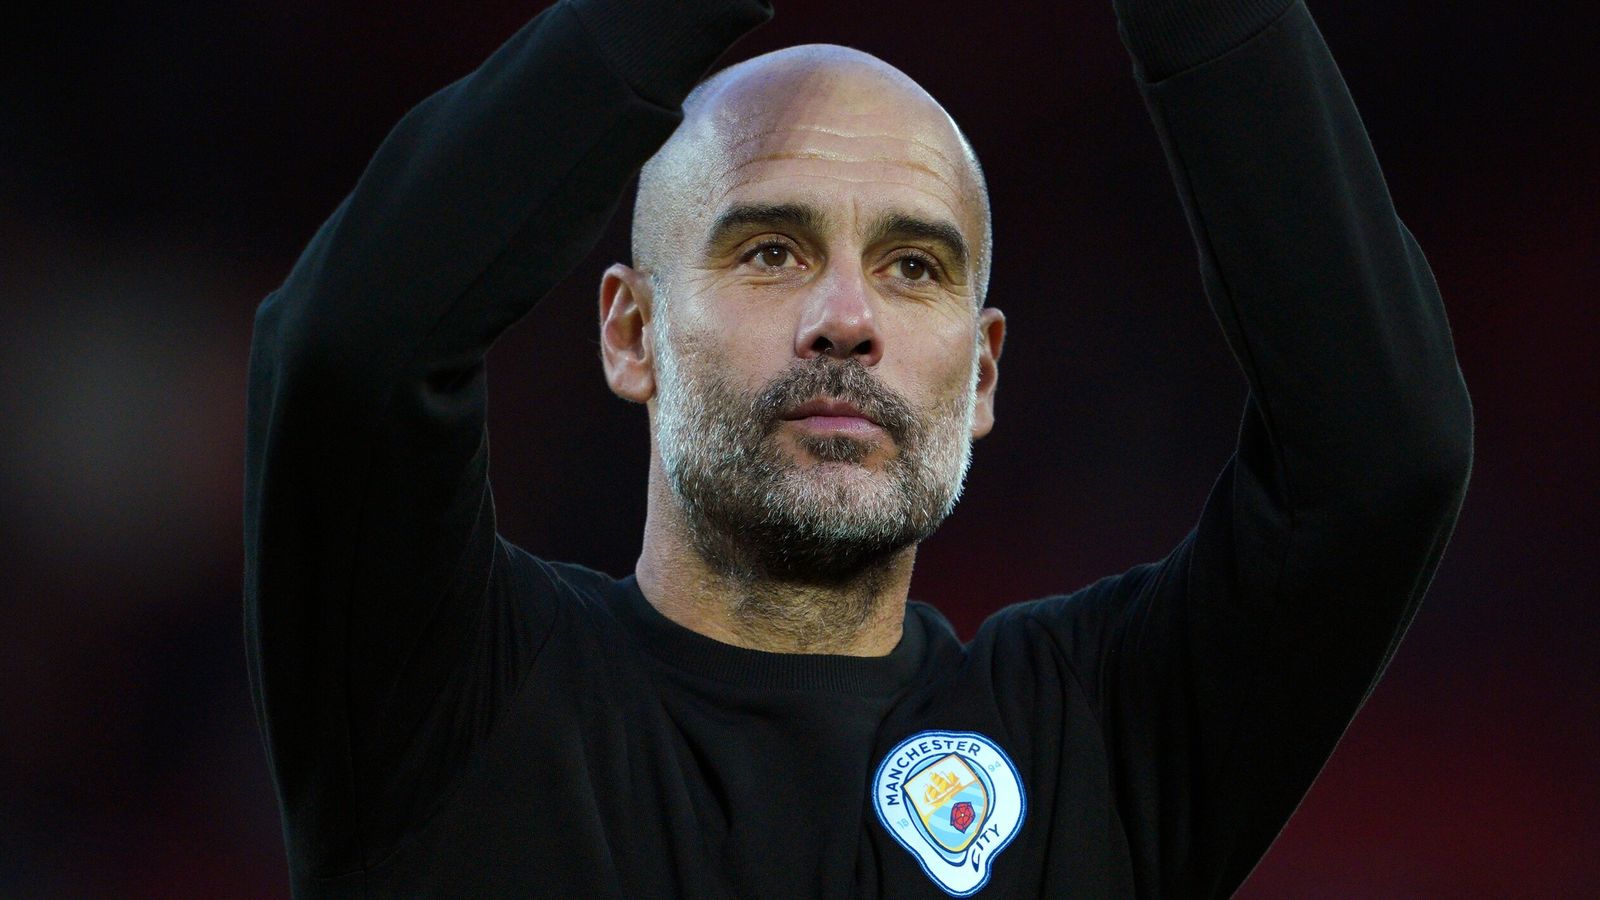 Pep Guardiola: Man City boss to take charge for Newcastle game after negative Covid-19 test